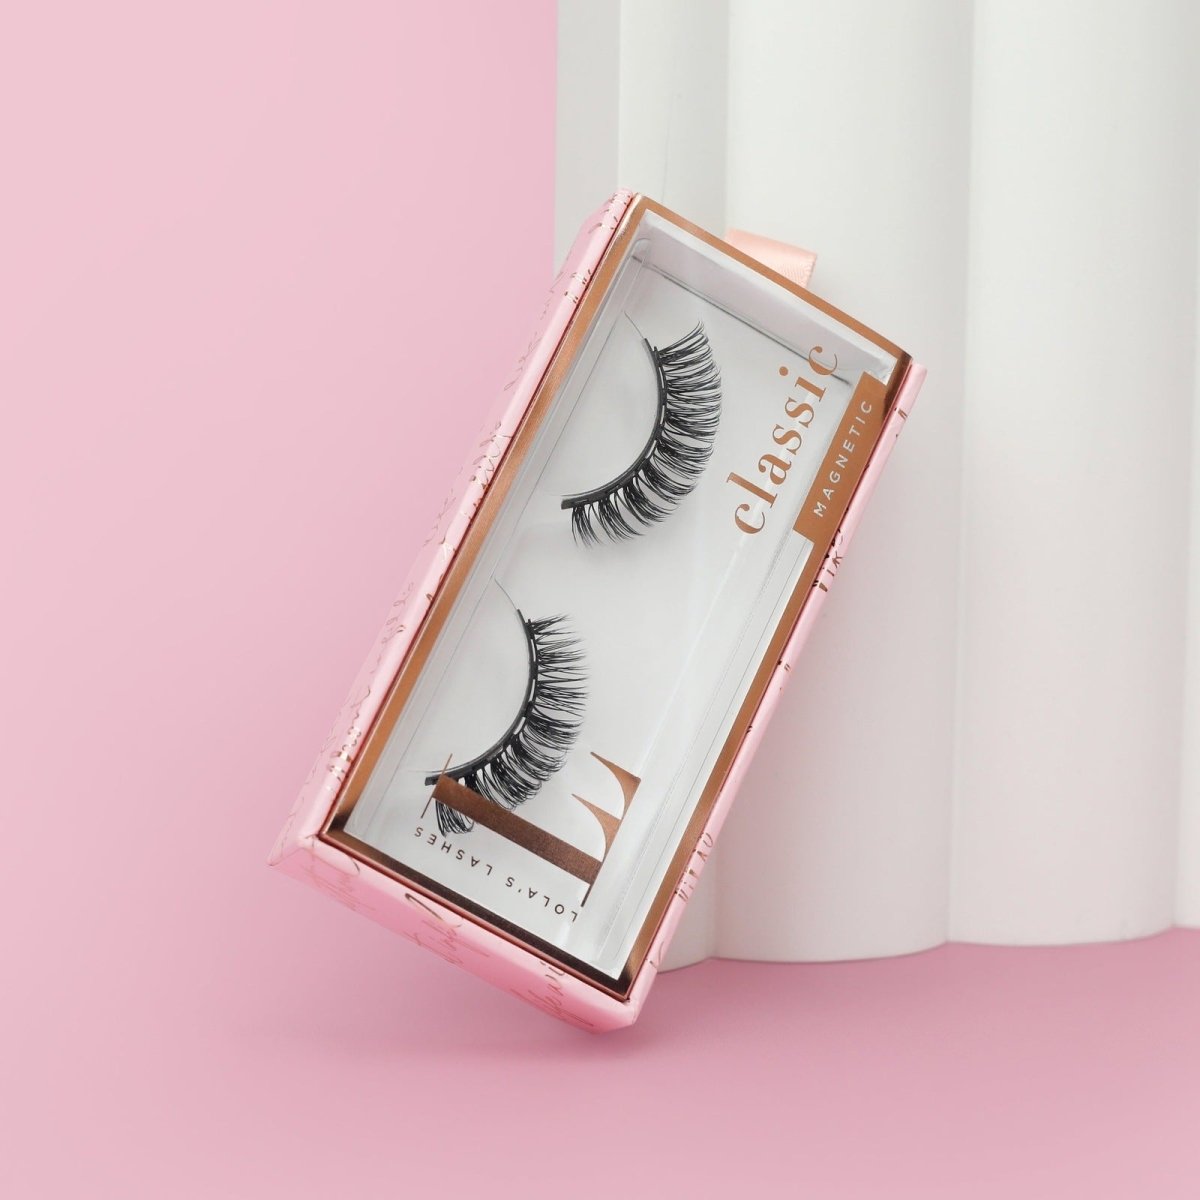 L.W.I Worth It Russian Magnetic Lashes - Lola's Lashes